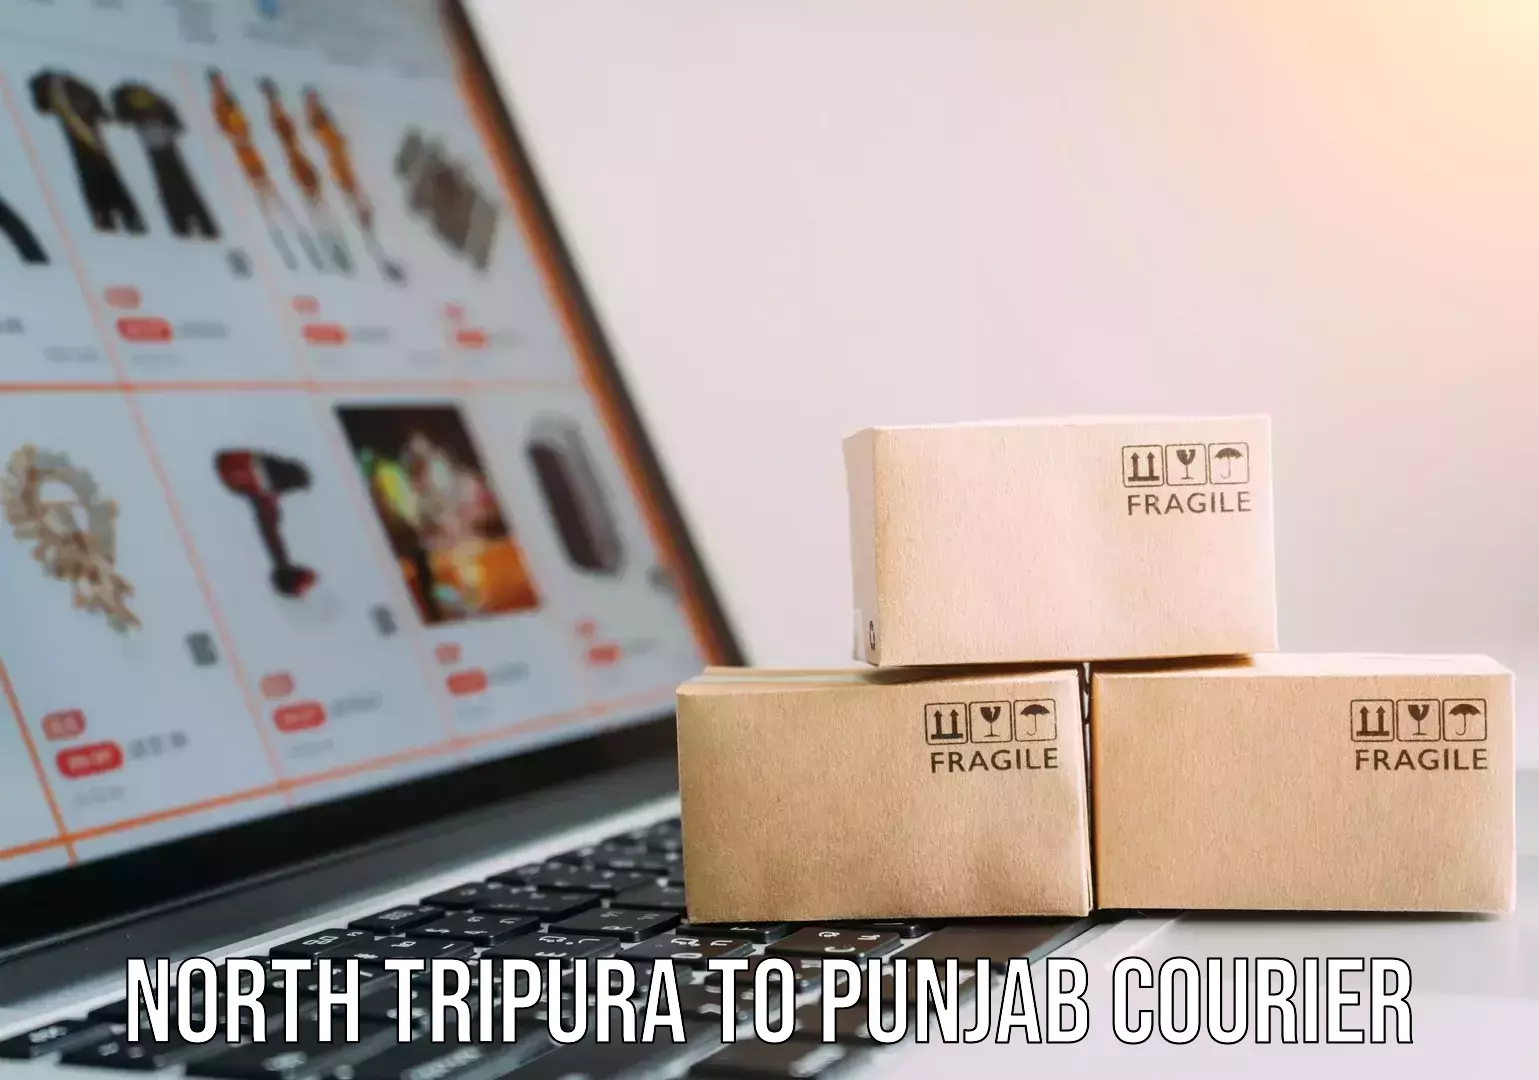 24-hour courier services North Tripura to Punjab